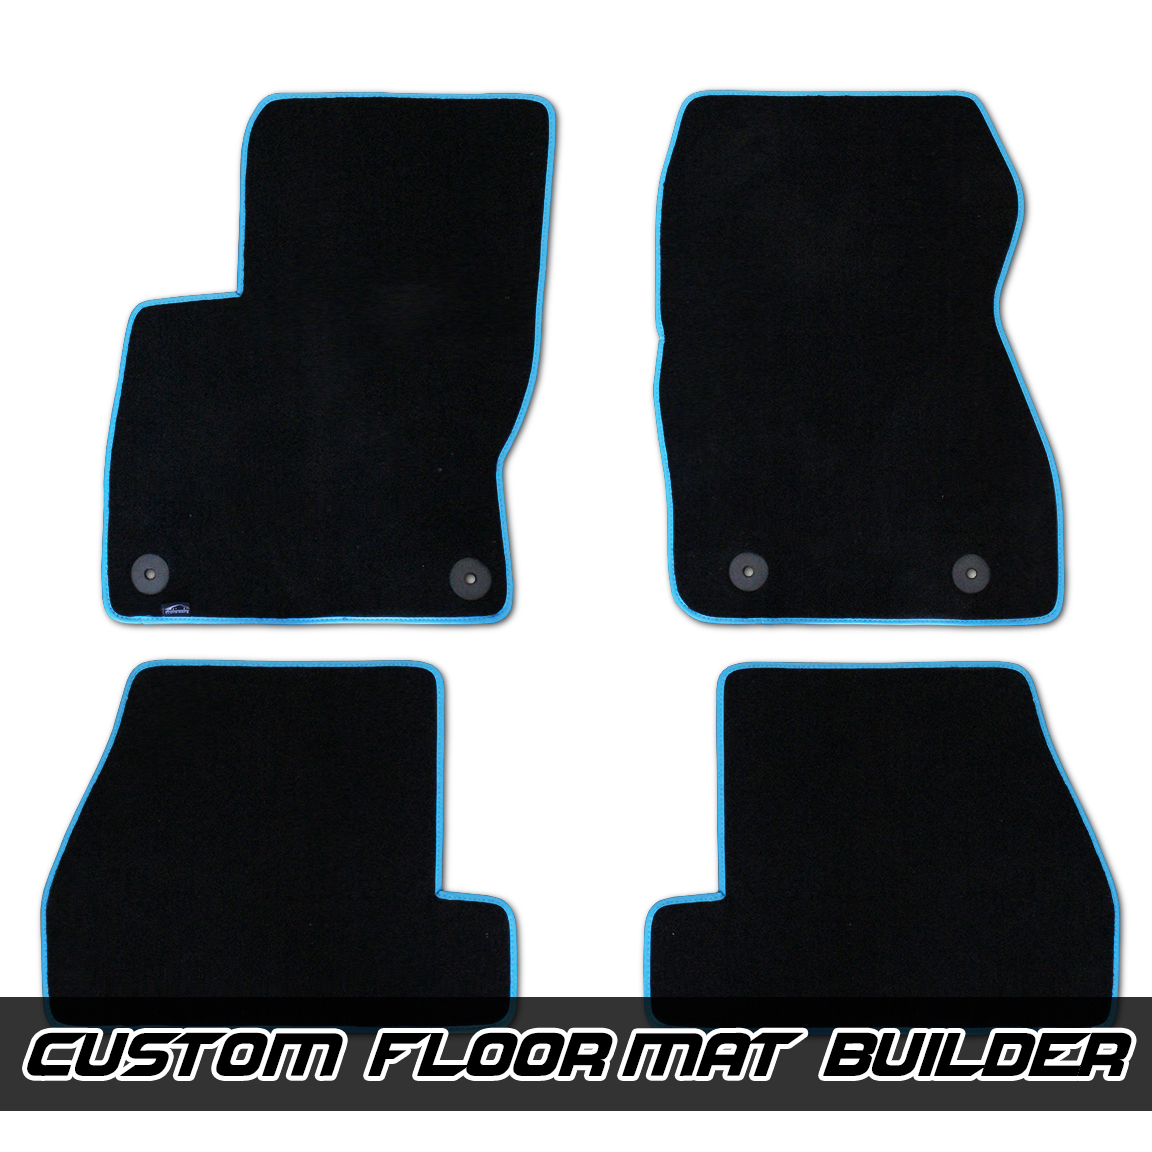 VelourTex Fitted Carpet Floor Mats for the Ford Focus RS / ST (Set of 4)